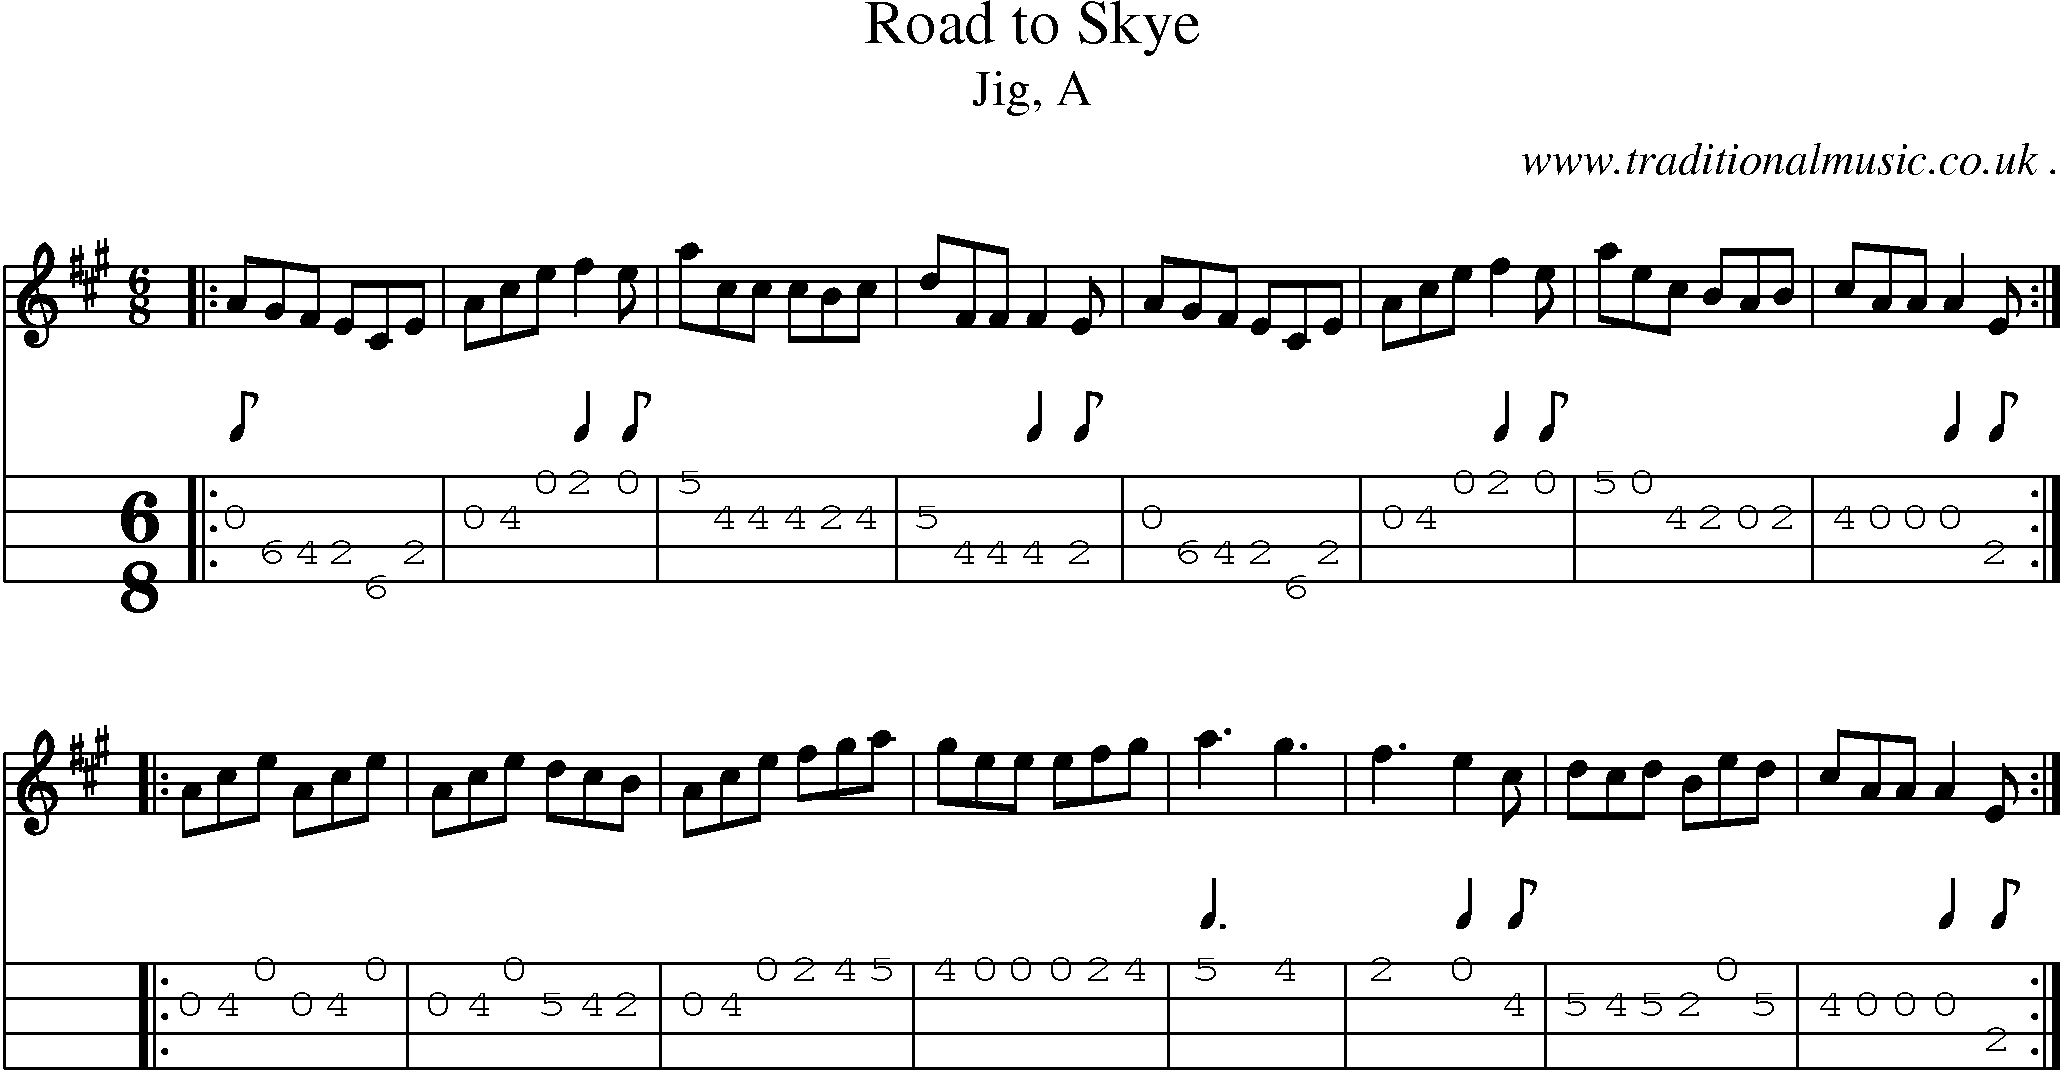 Sheet-music  score, Chords and Mandolin Tabs for Road To Skye